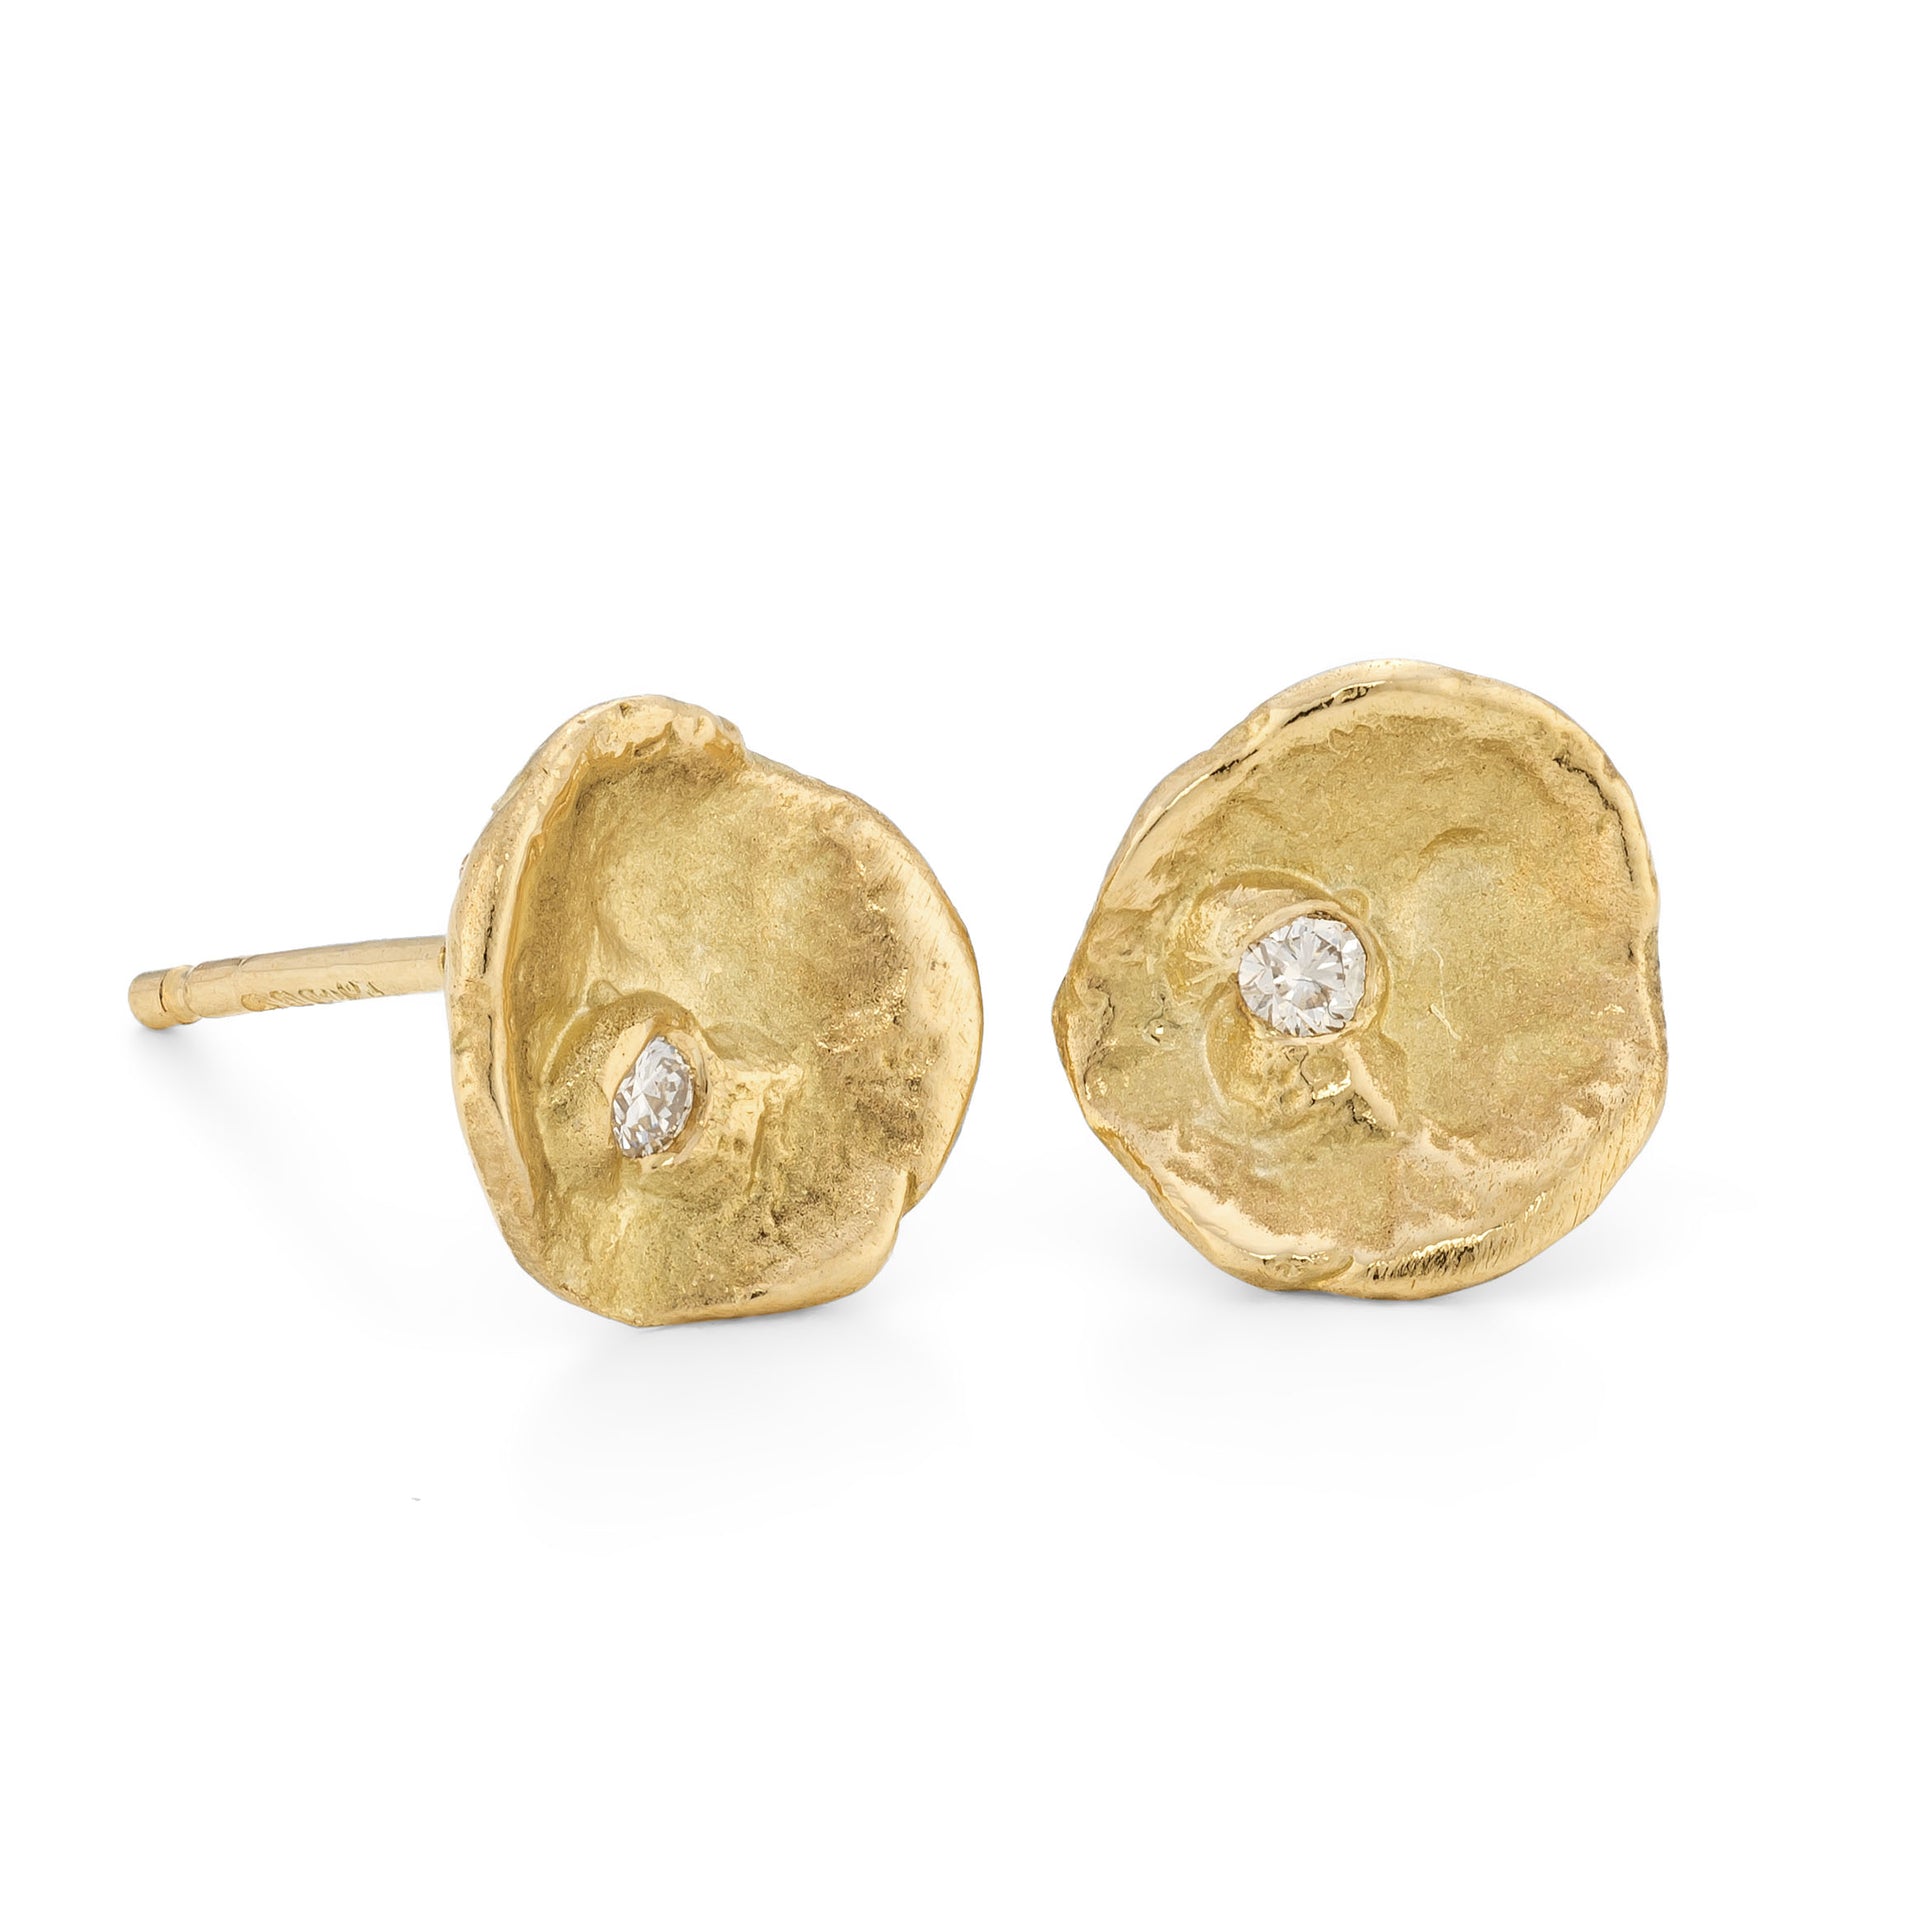 18ct yellow gold stud earrings with white diamonds, handcrafted by Emily Nixon from her Cornish studio. 